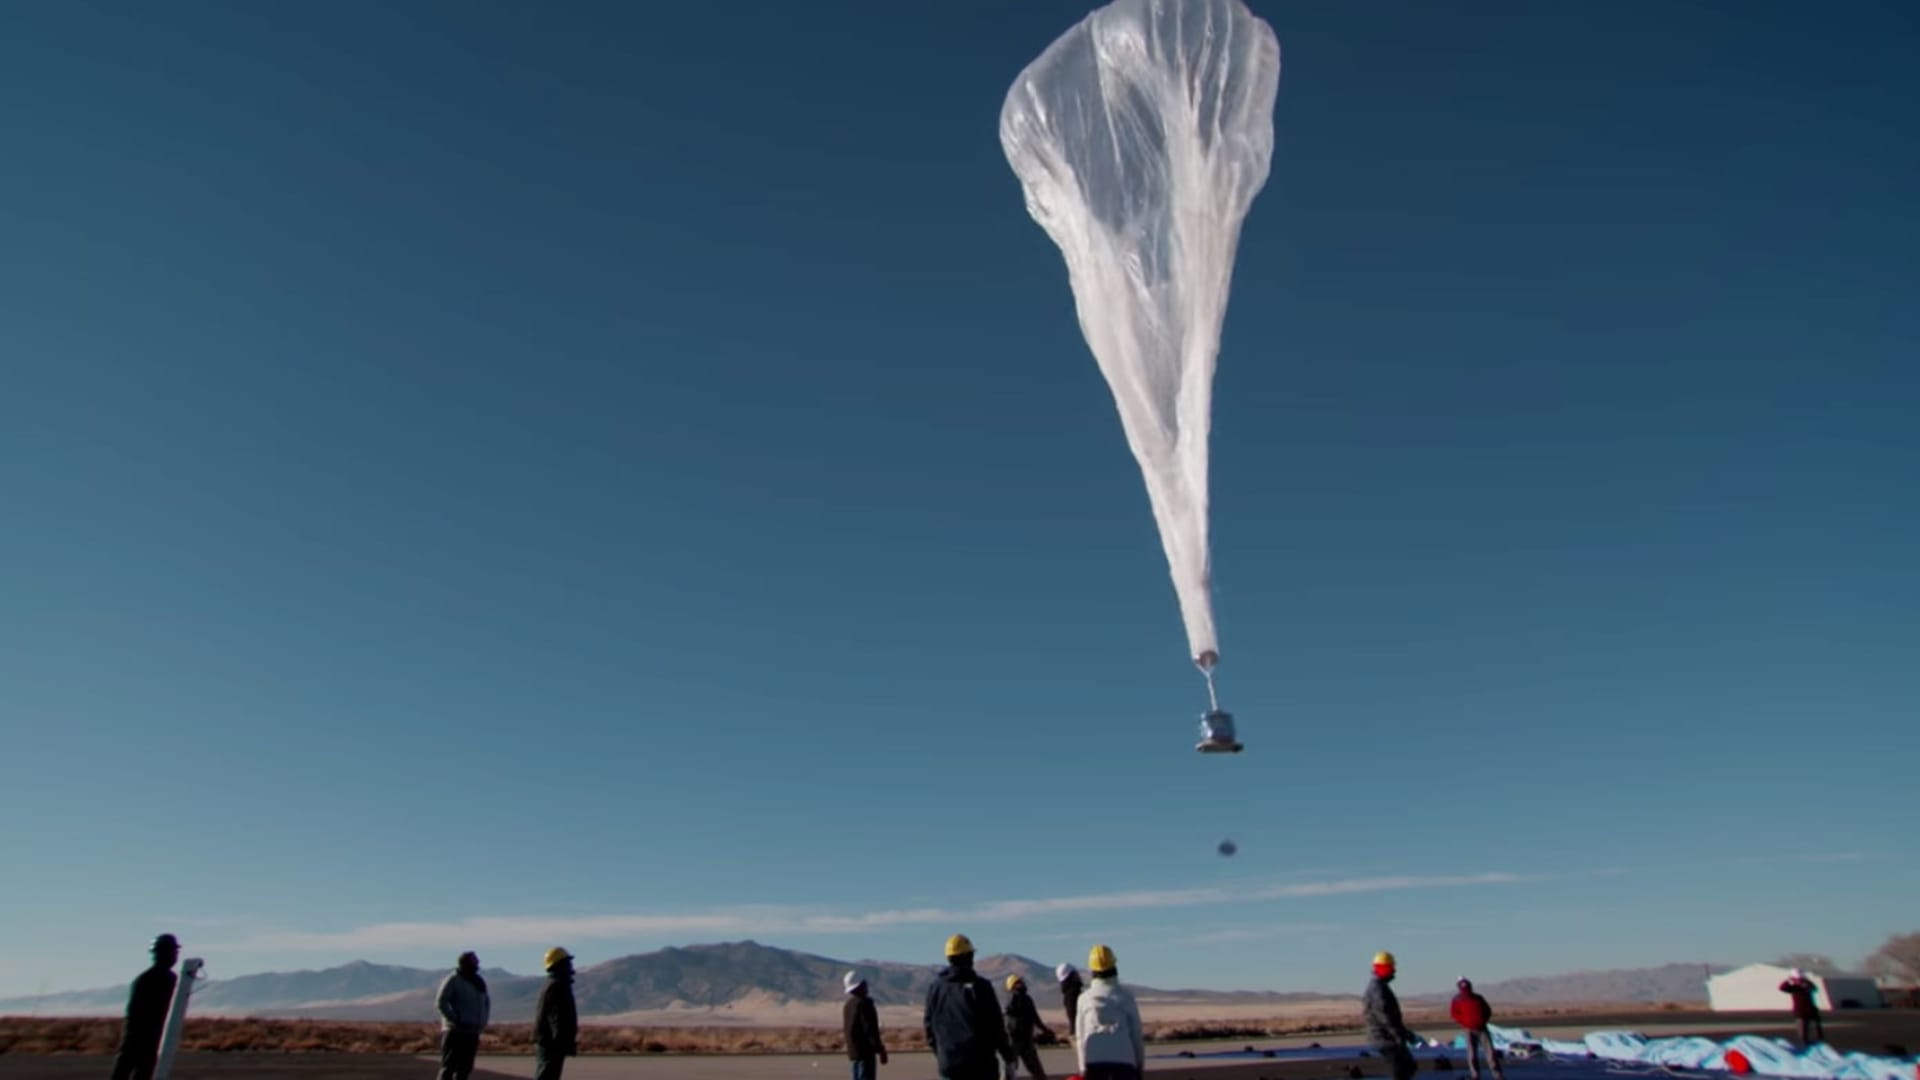 Google parent company Alphabet just launched balloons that beam high-speed internet in Kenya